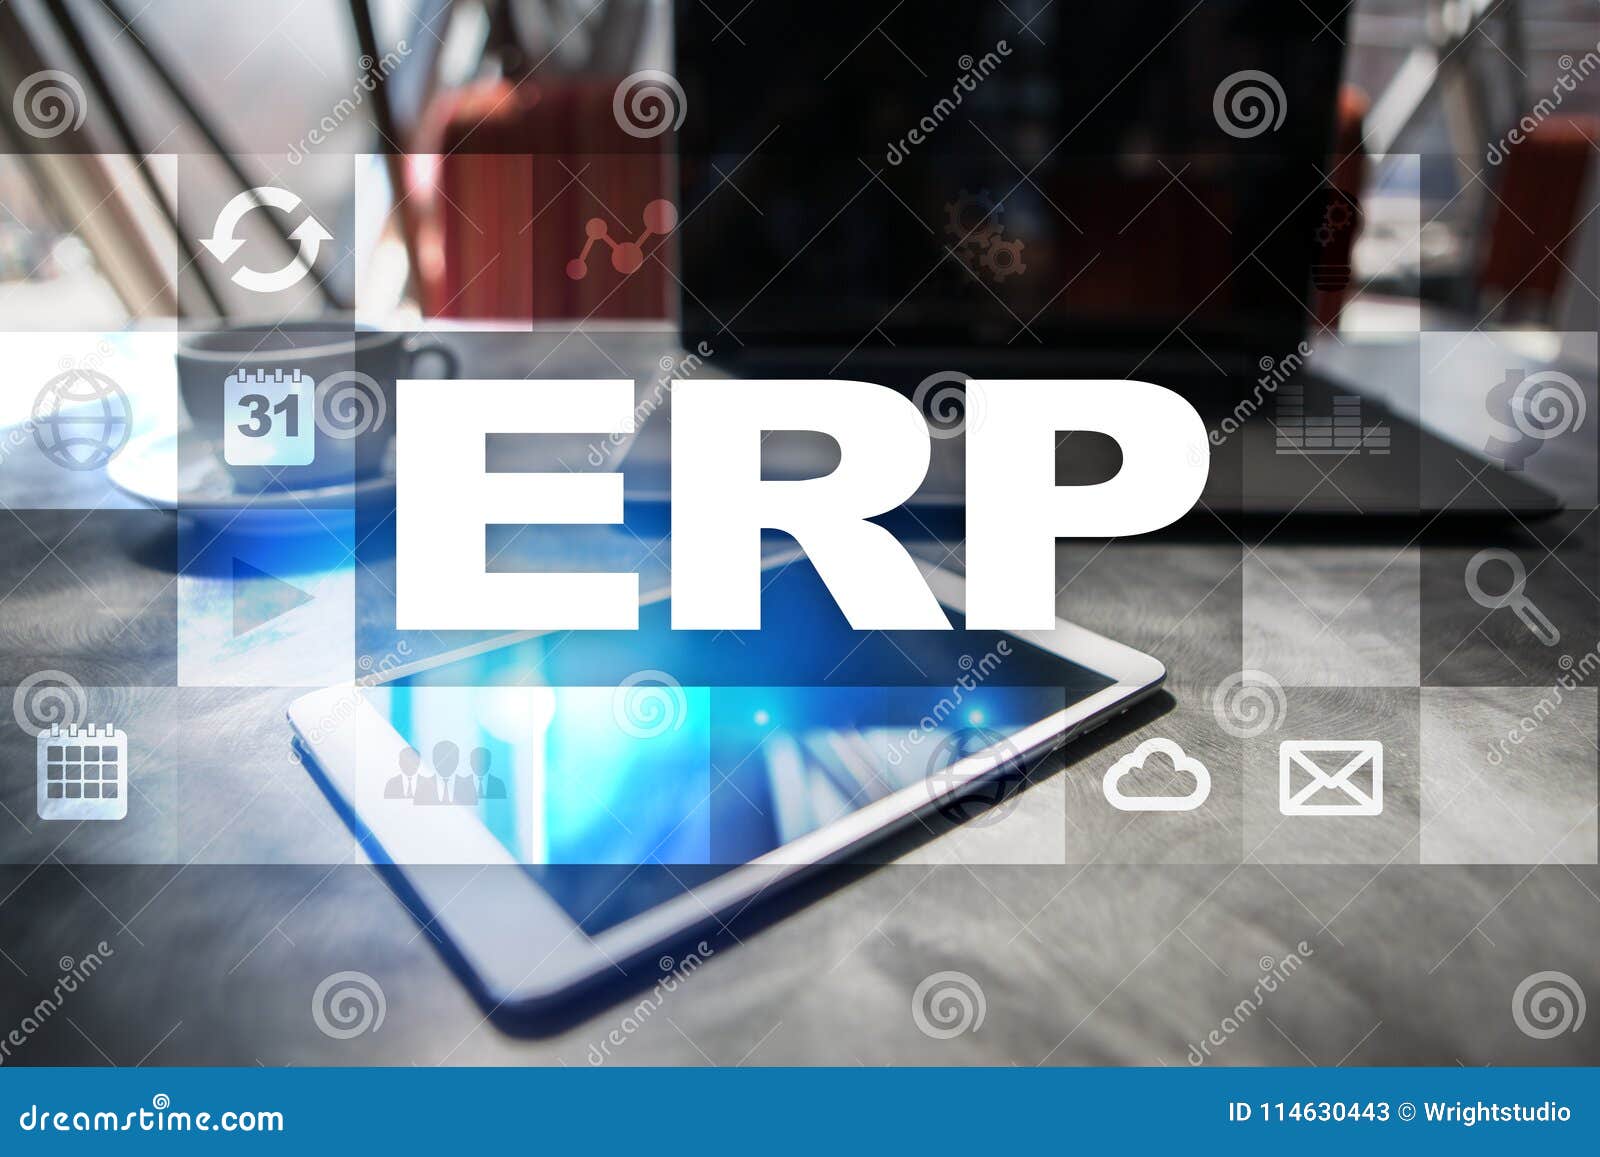 Enterprise Resources Planning Business And Technology ...